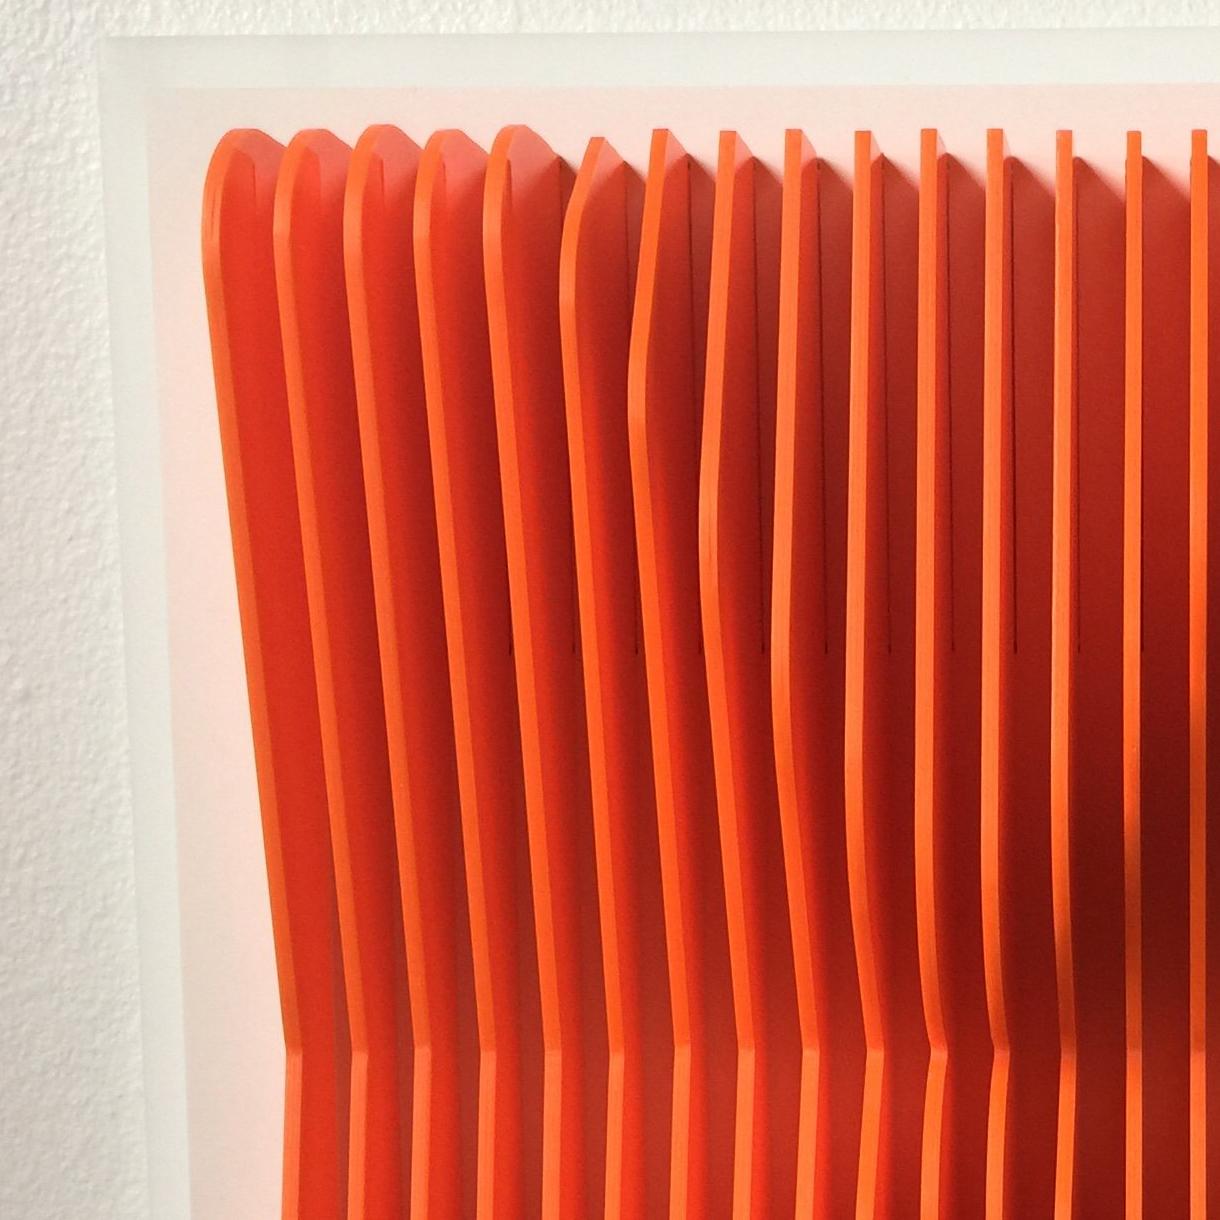 Pinched Orange - Abstract Geometric Sculpture by Jose Margulis